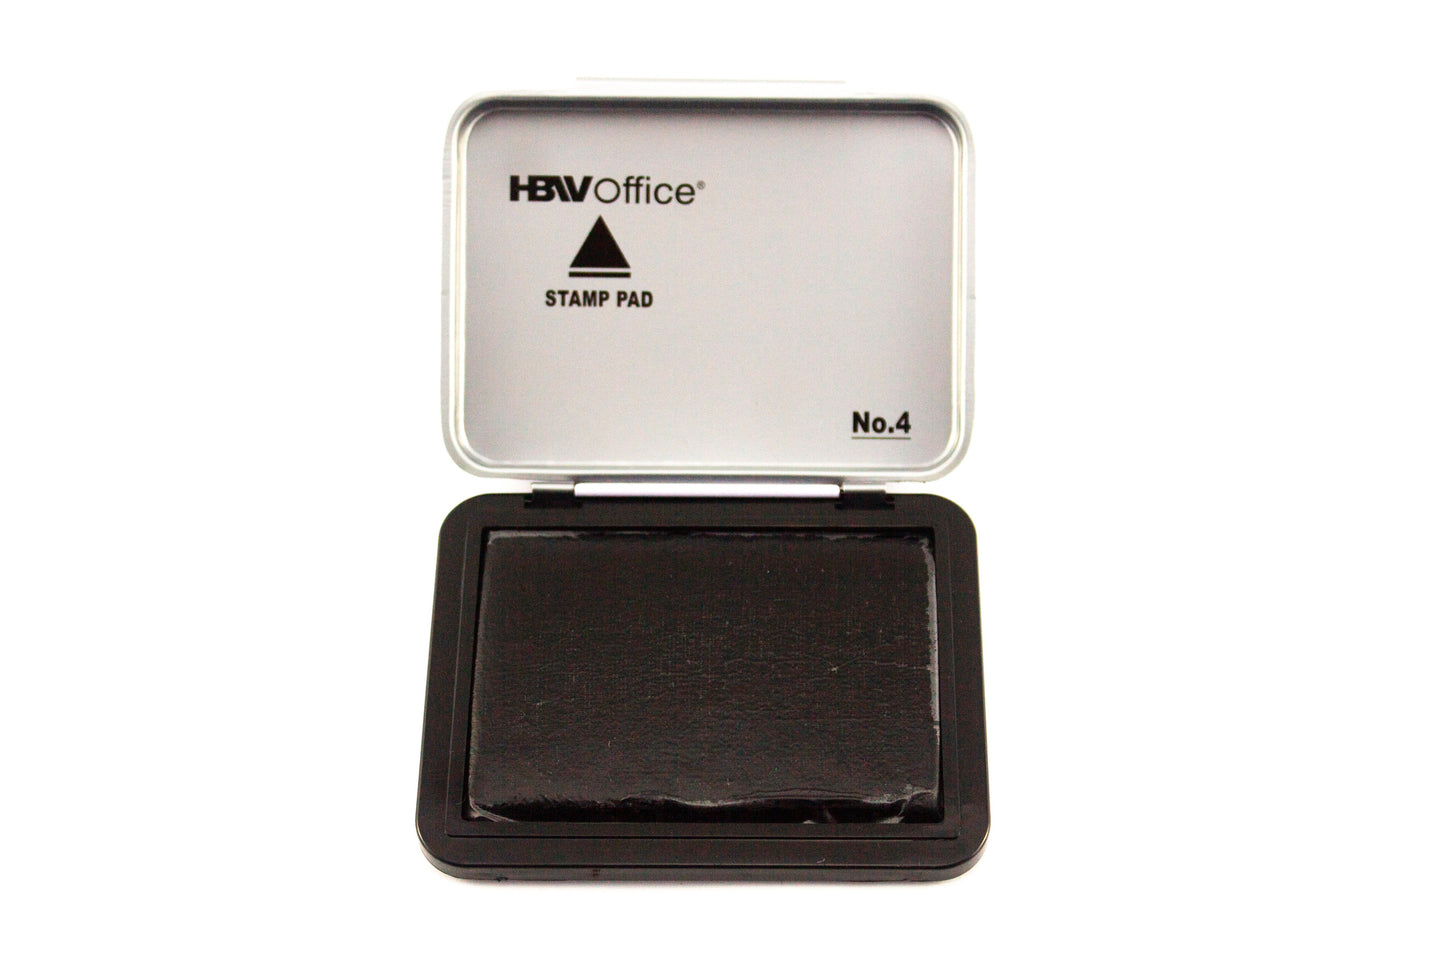 HBW Office Stamp Pad No. 4 | Sold by 12s